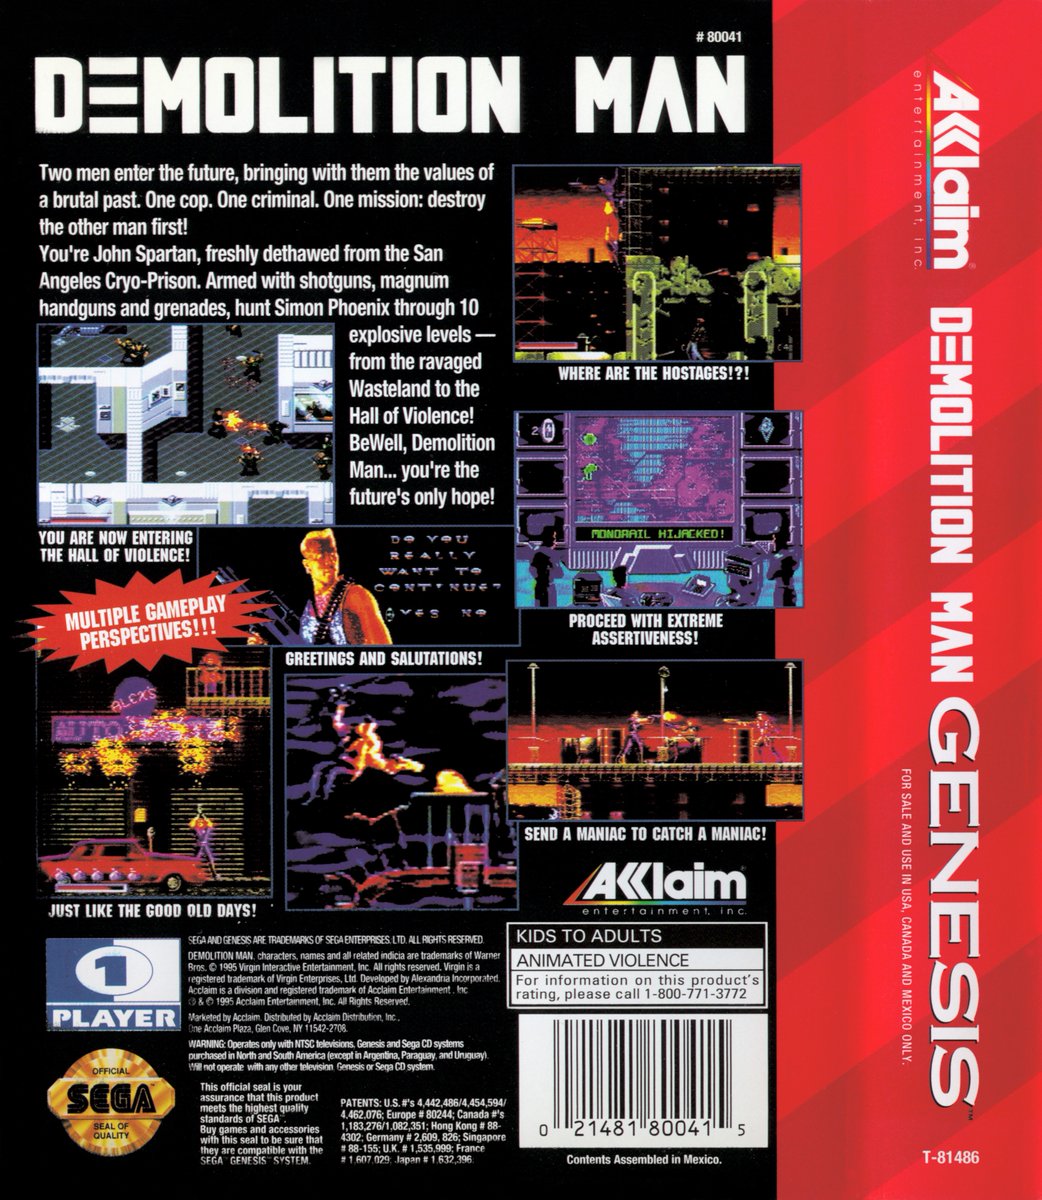 DEMOLITION MAN: In 1995 John Spartan set out to stop Simon Phoenix. A Sega Mega Drive/Genesis game from Alexandria & Acclaim this was based on the awesome film and also came to other formats, did you ever send a maniac to catch one? #retrogaming #Sega #Nintendo #90s #film #gaming